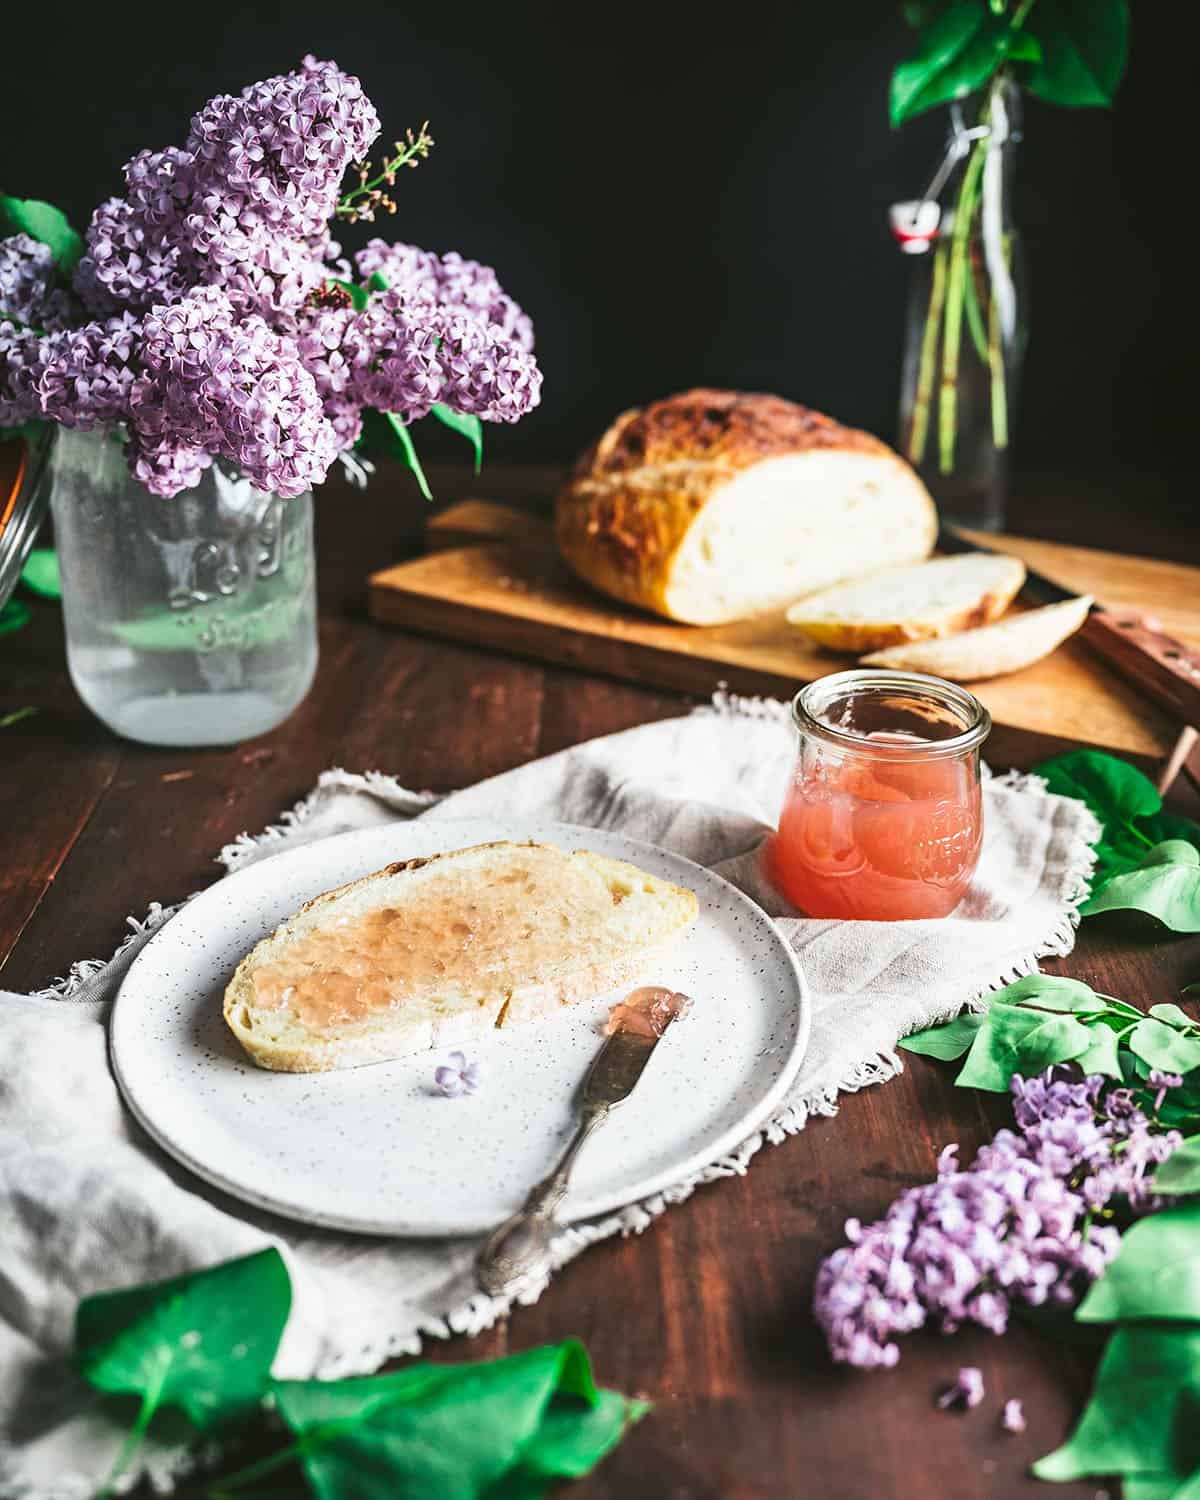 An open jar of lilac jelly sitting by a plate of toast that has lilac jelly spread on it, surrounded by fresh lilacs. 